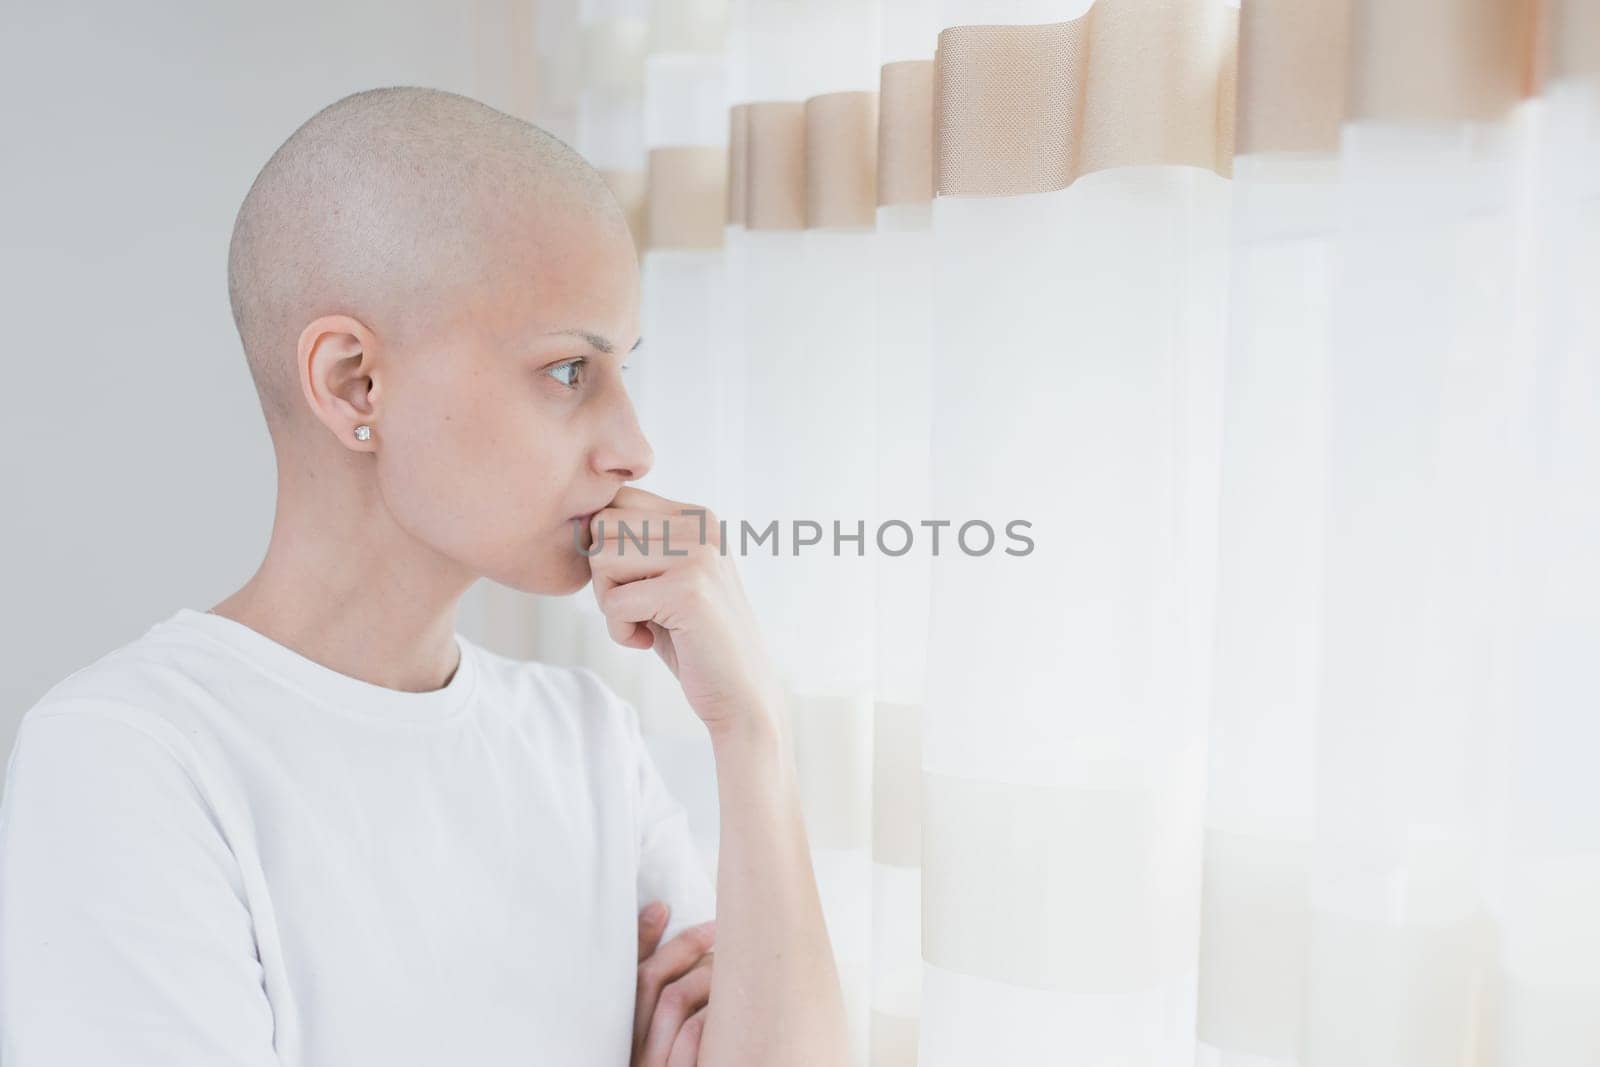 Bald woman with cancer wearing a white t-shirt looking at window.